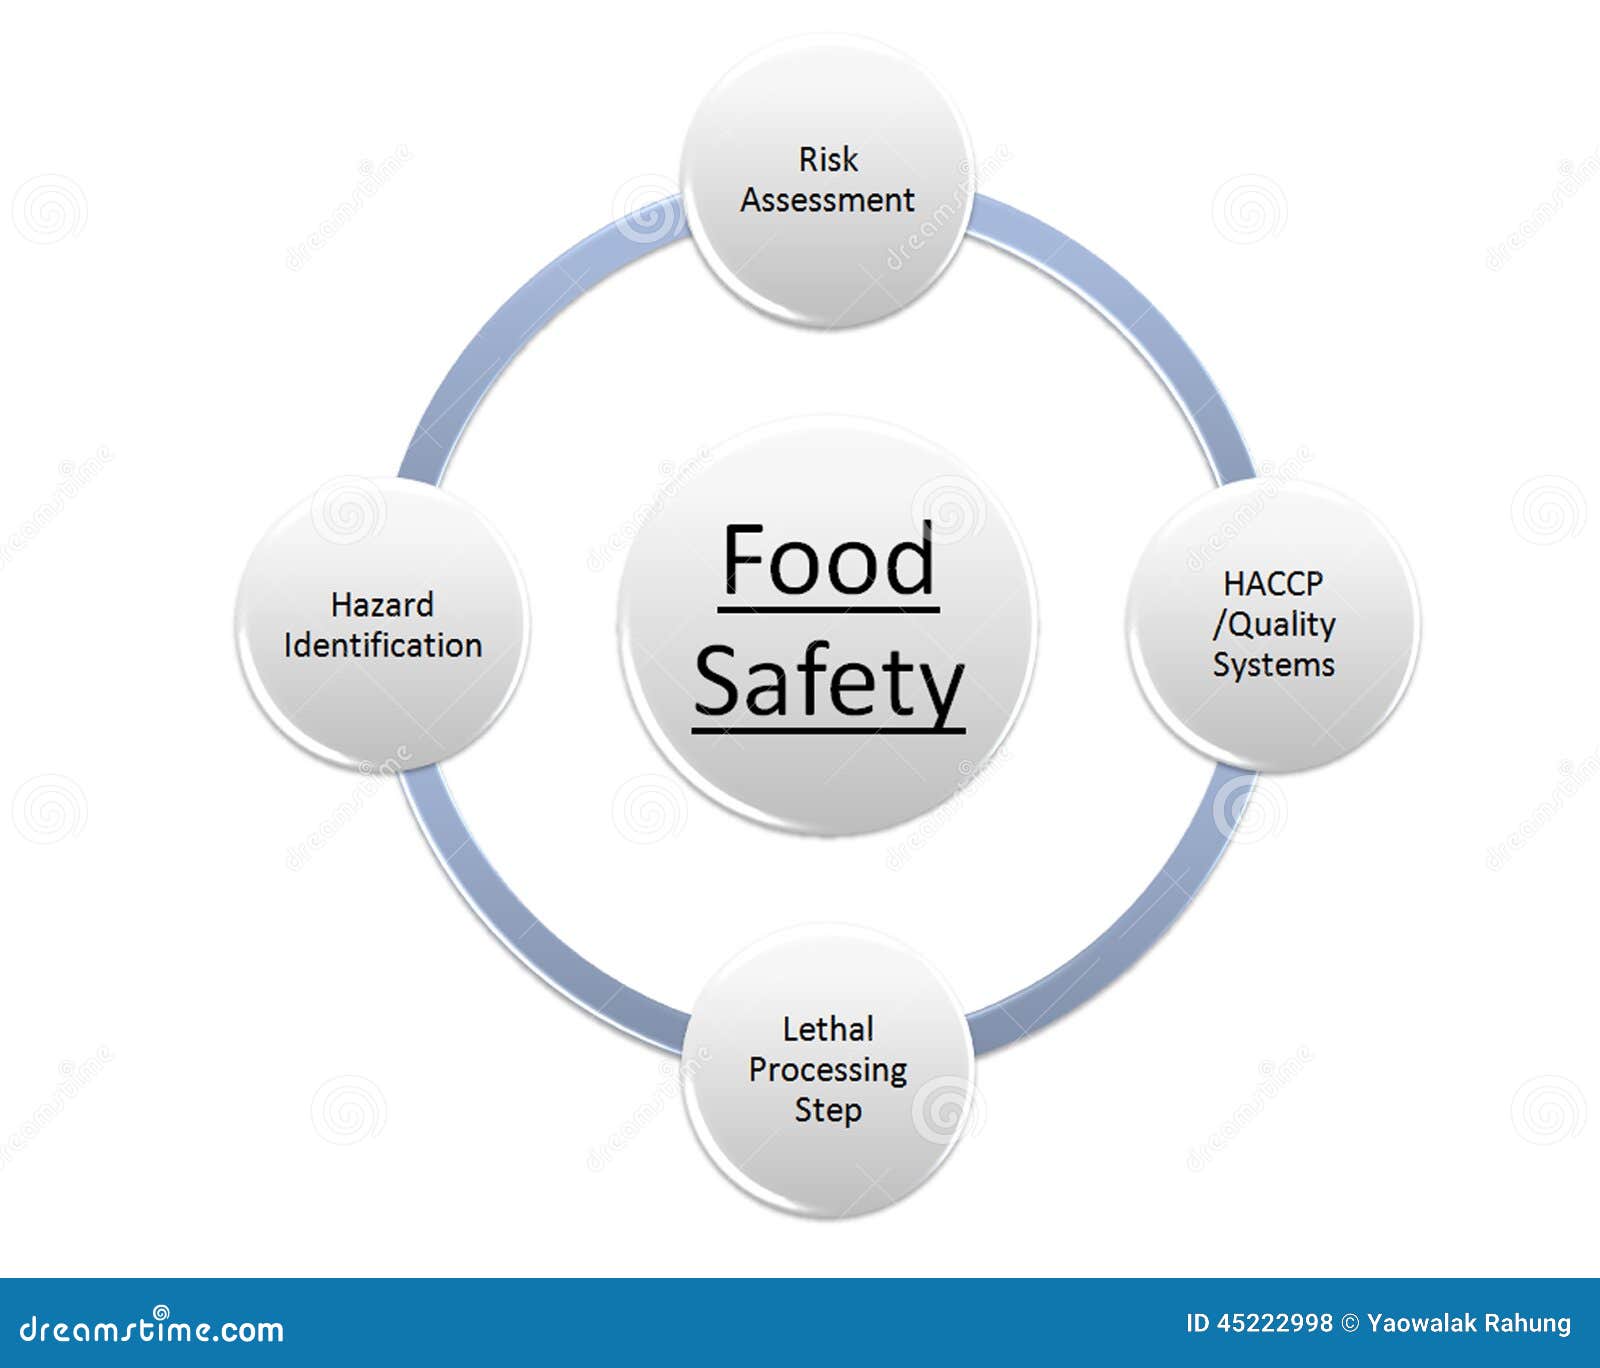 Food Production and Manufacturing Business: Example Business Plan